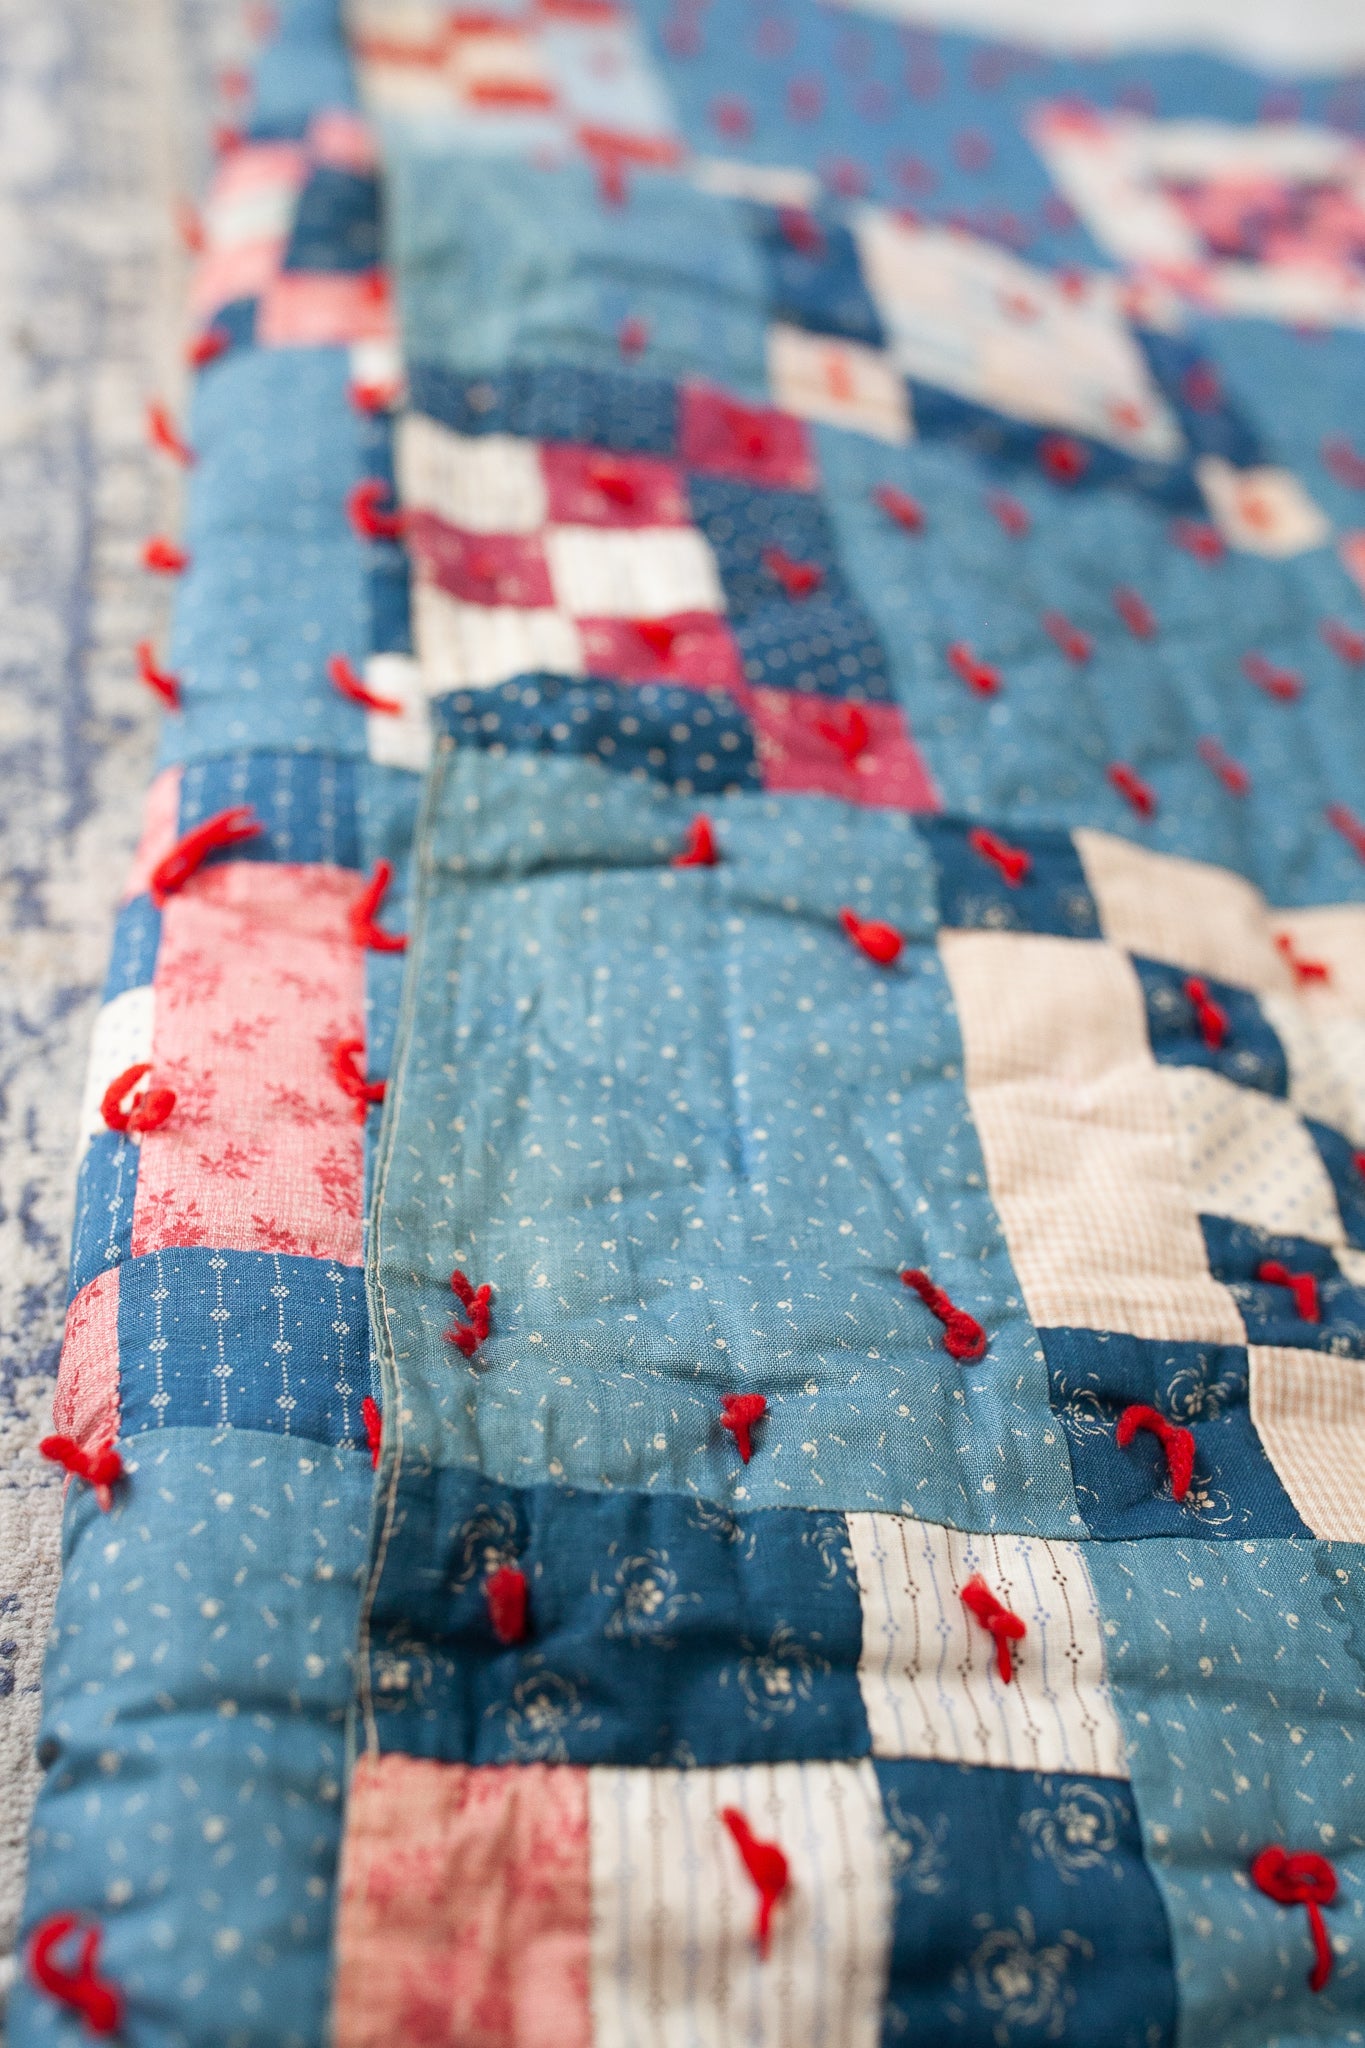 Vintage Quilt -  Red White and Blue Quilt - Tie Quilt -9 patch